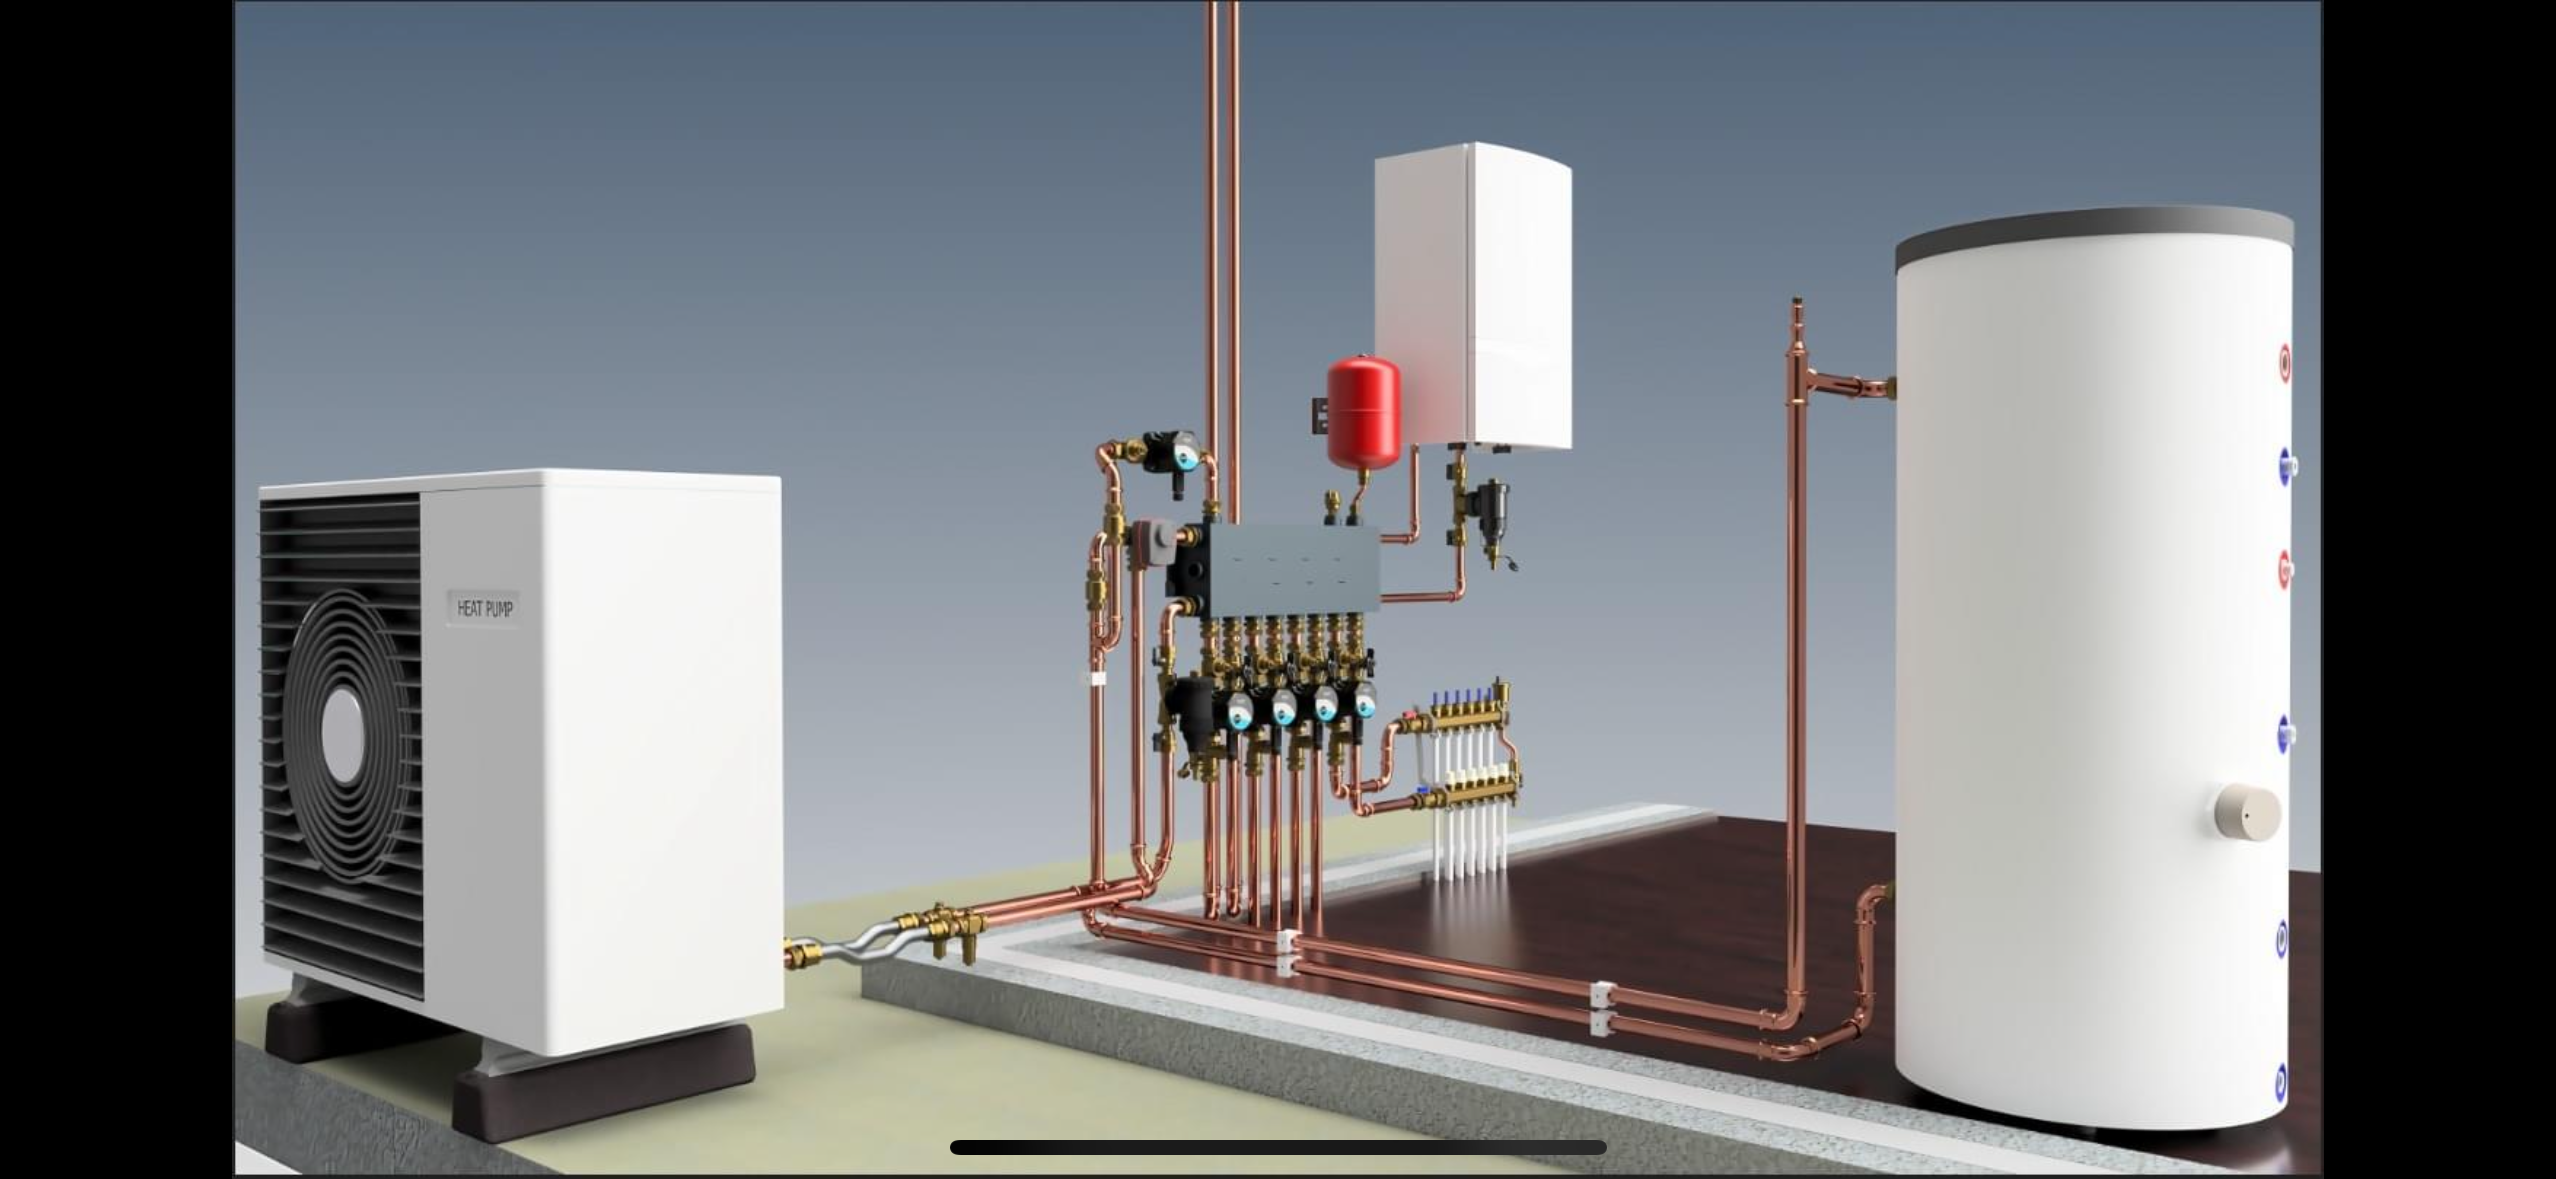 Visual impression of a heating system design